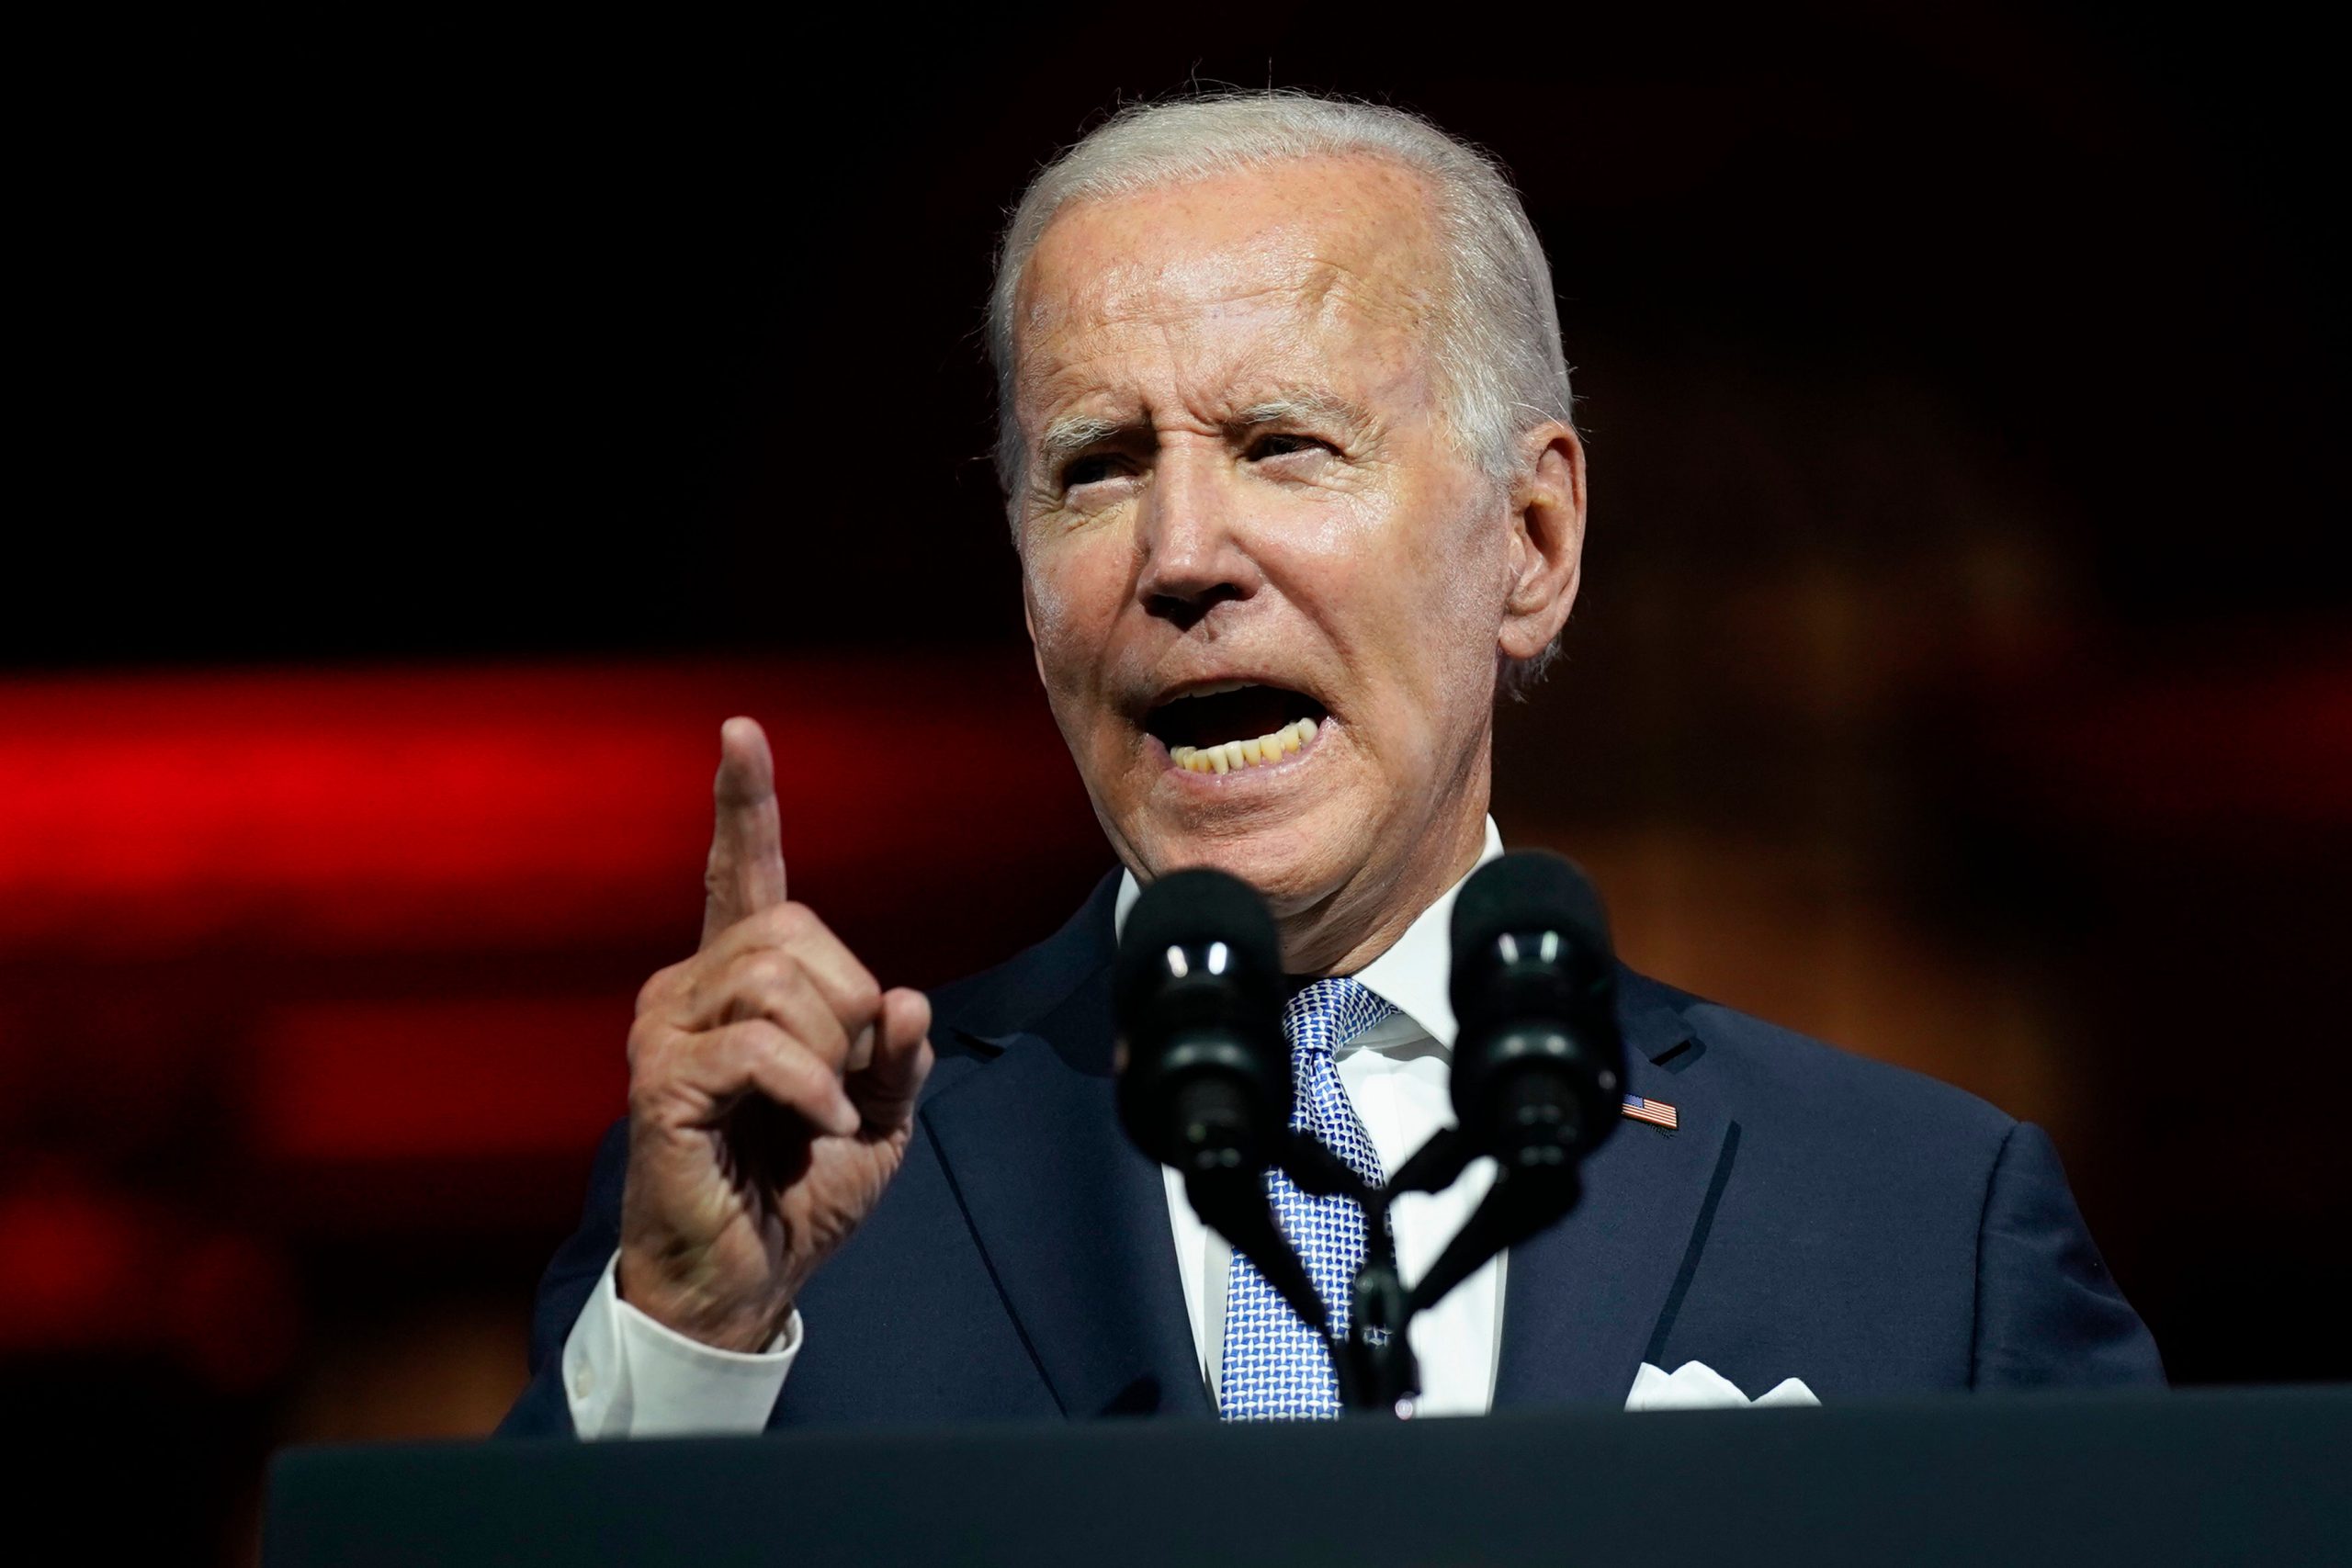 Joe Biden struggles with teleprompter, ‘confused’ and guided off stage by Secret Service agent at Fort Liberty | Watch video